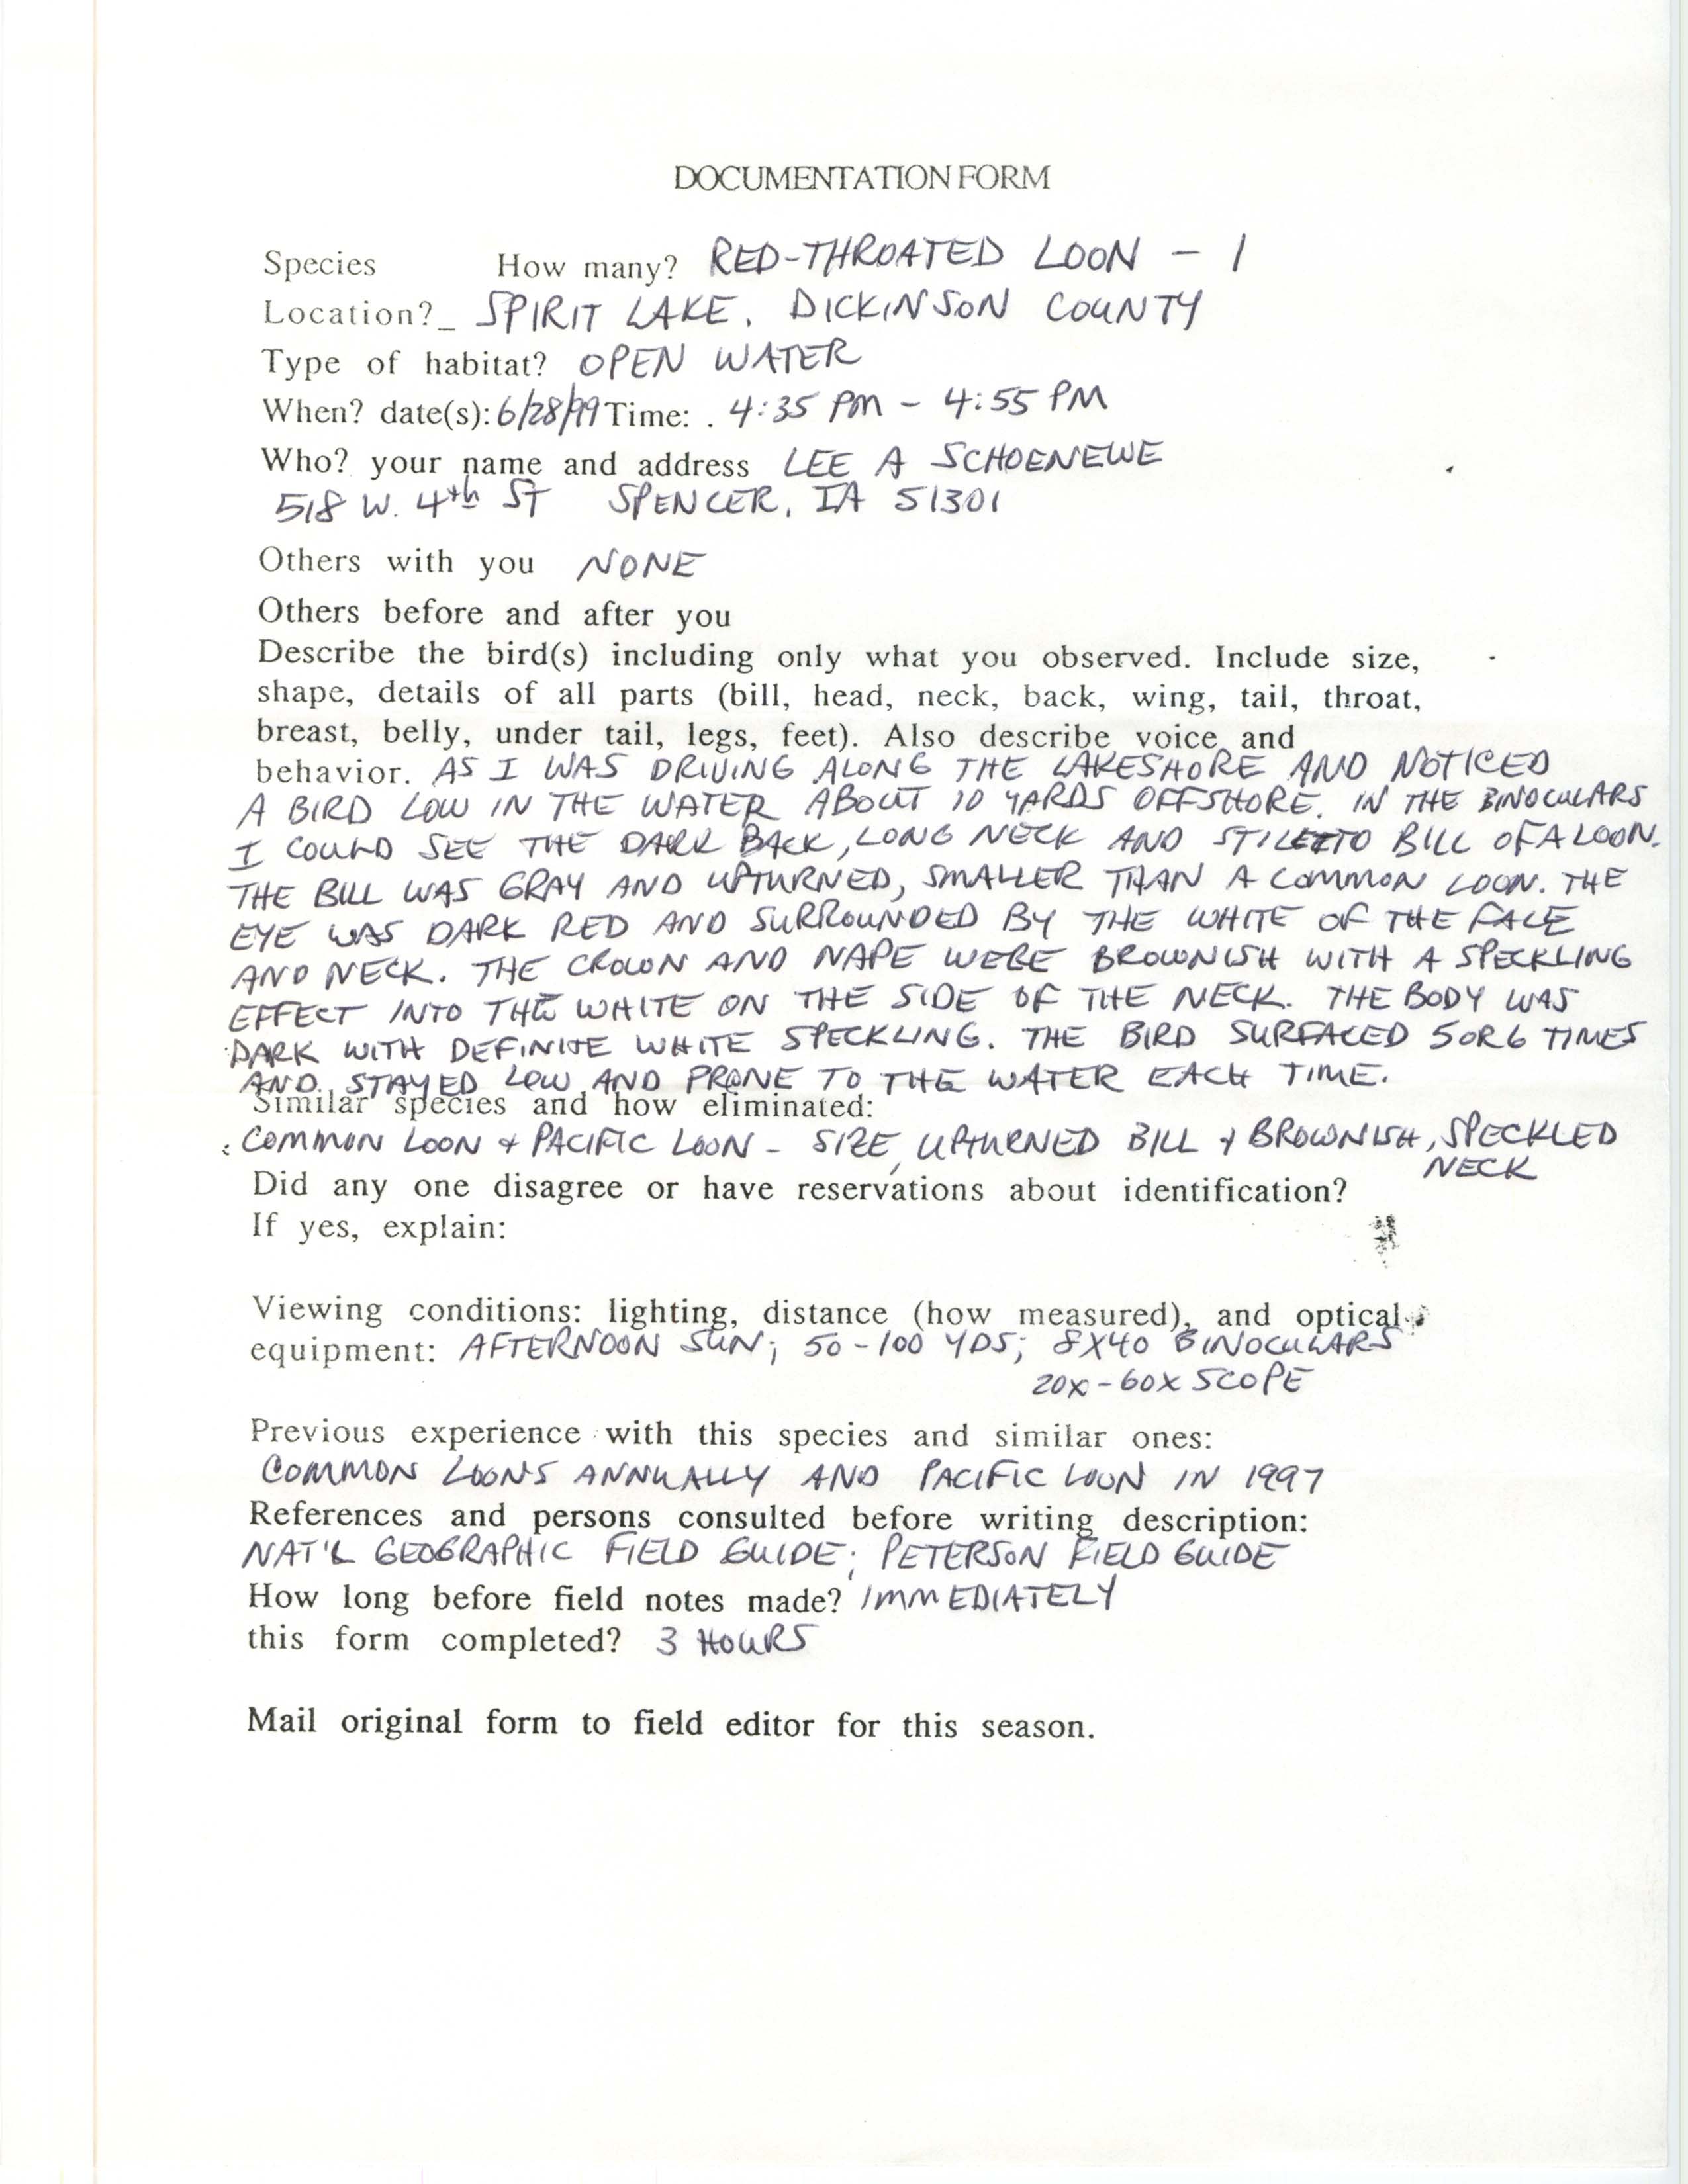 Rare bird documentation form for Red-throated Loon at Spirit Lake, 1999